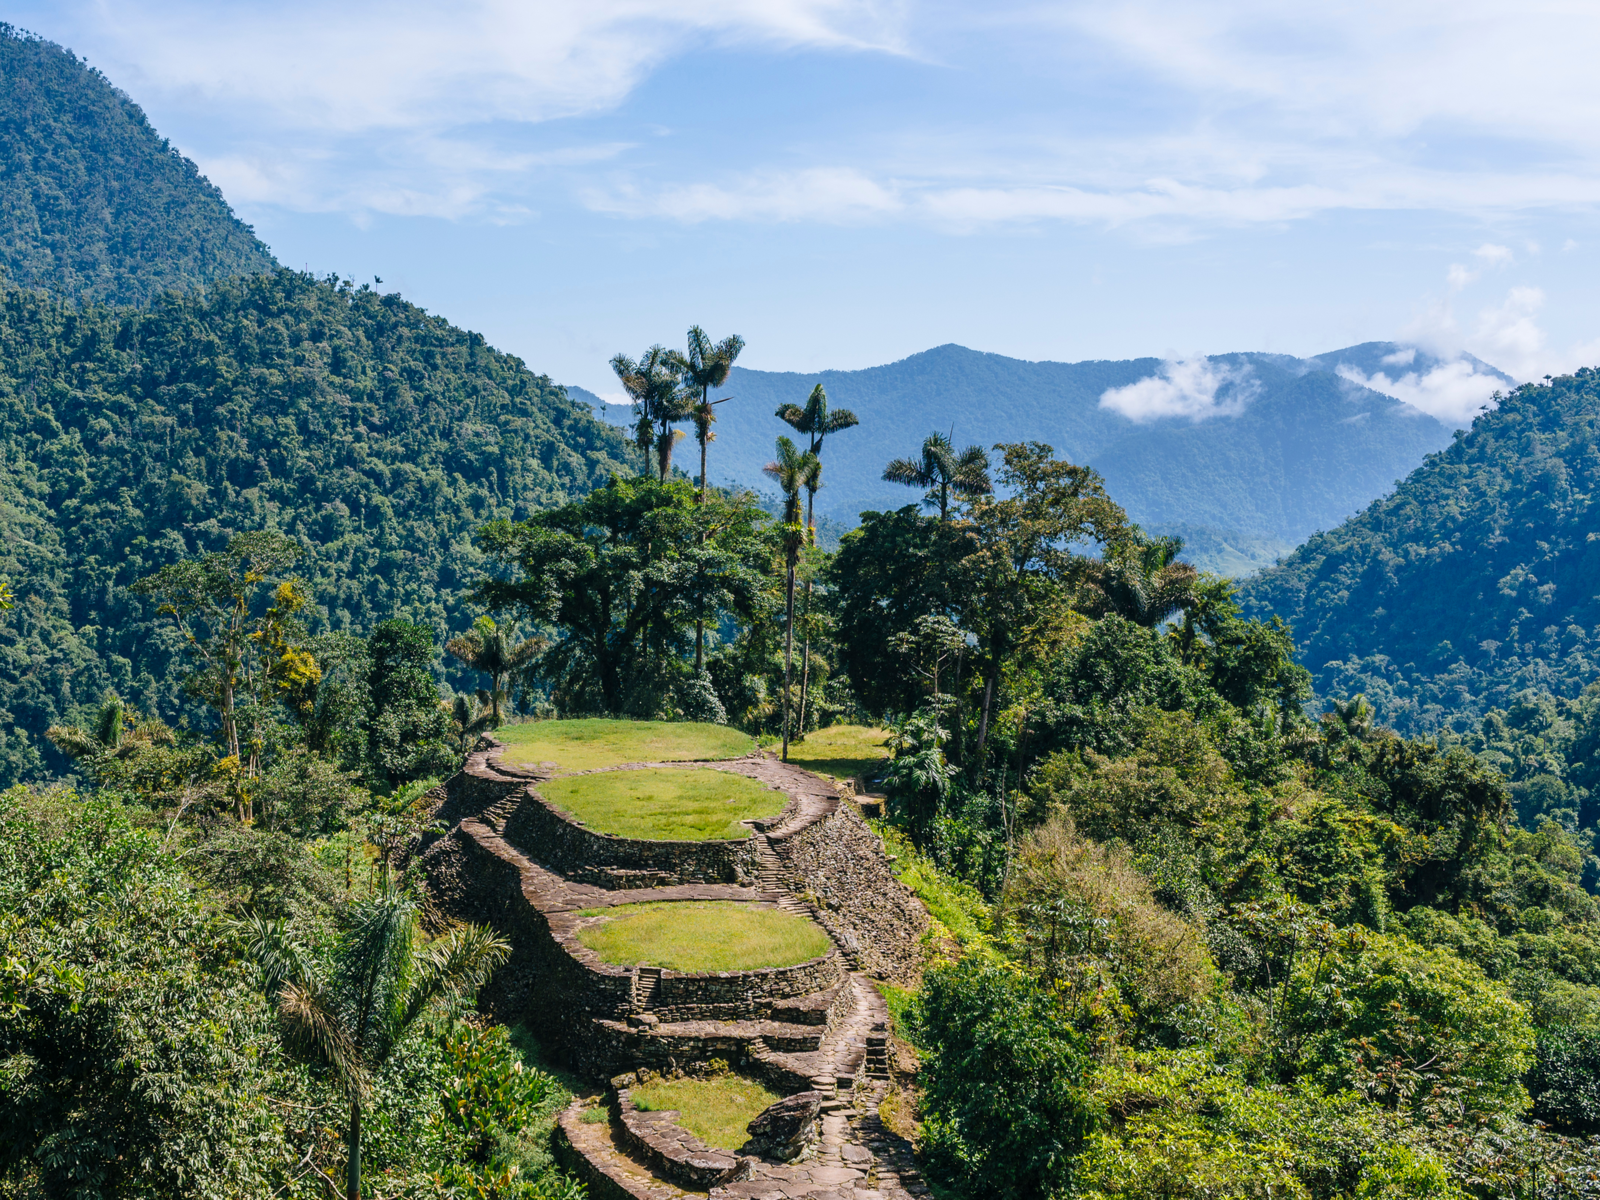 Lost City of Ciudad Perdida and the terraces by the city pictured during the cheapest time to go to Colombia